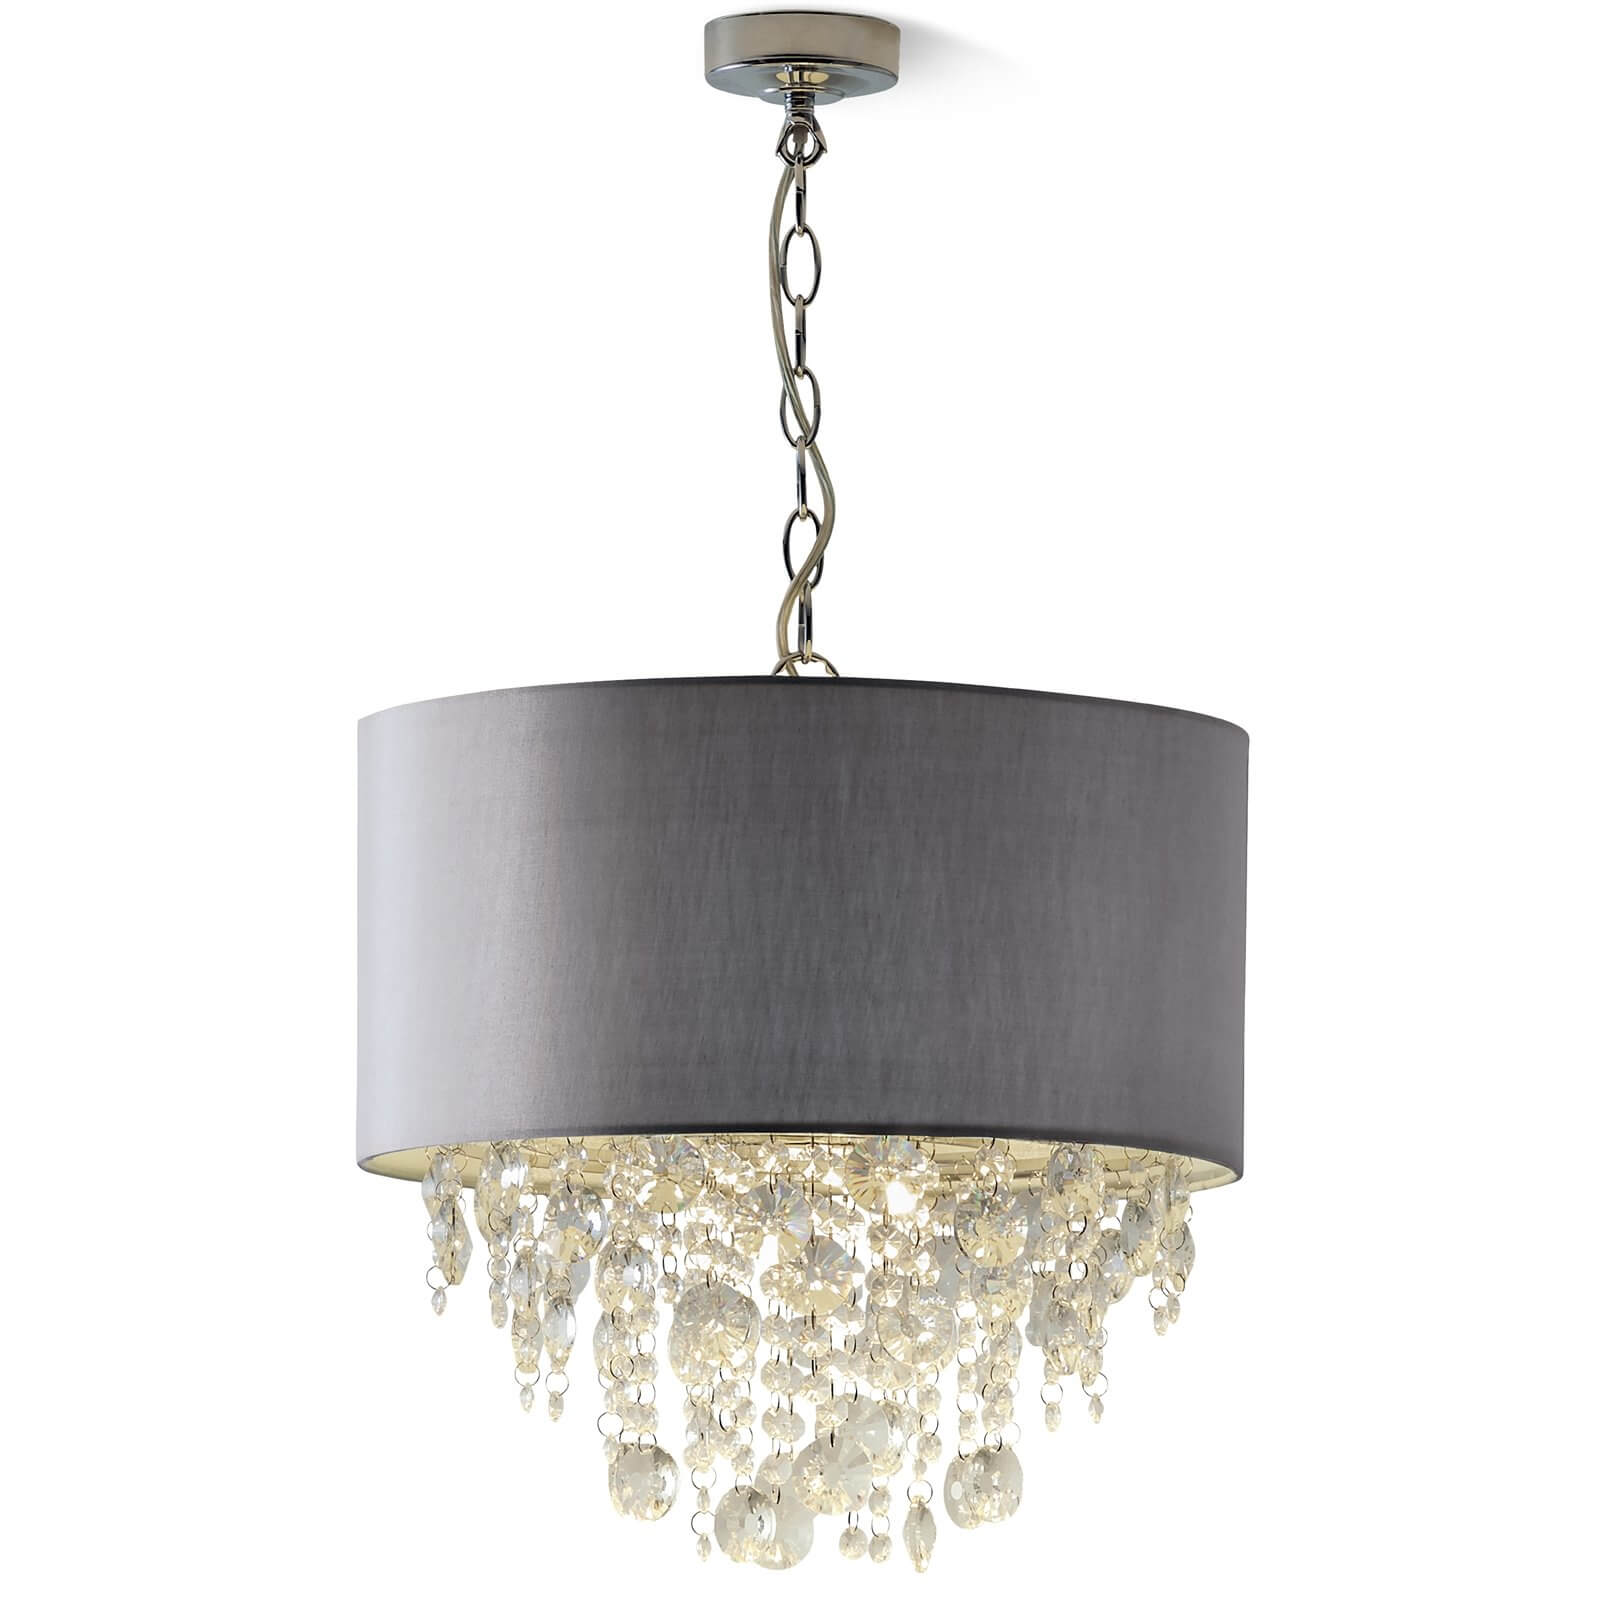 Wedmore Ceiling Light with Crystal Droplets - Grey